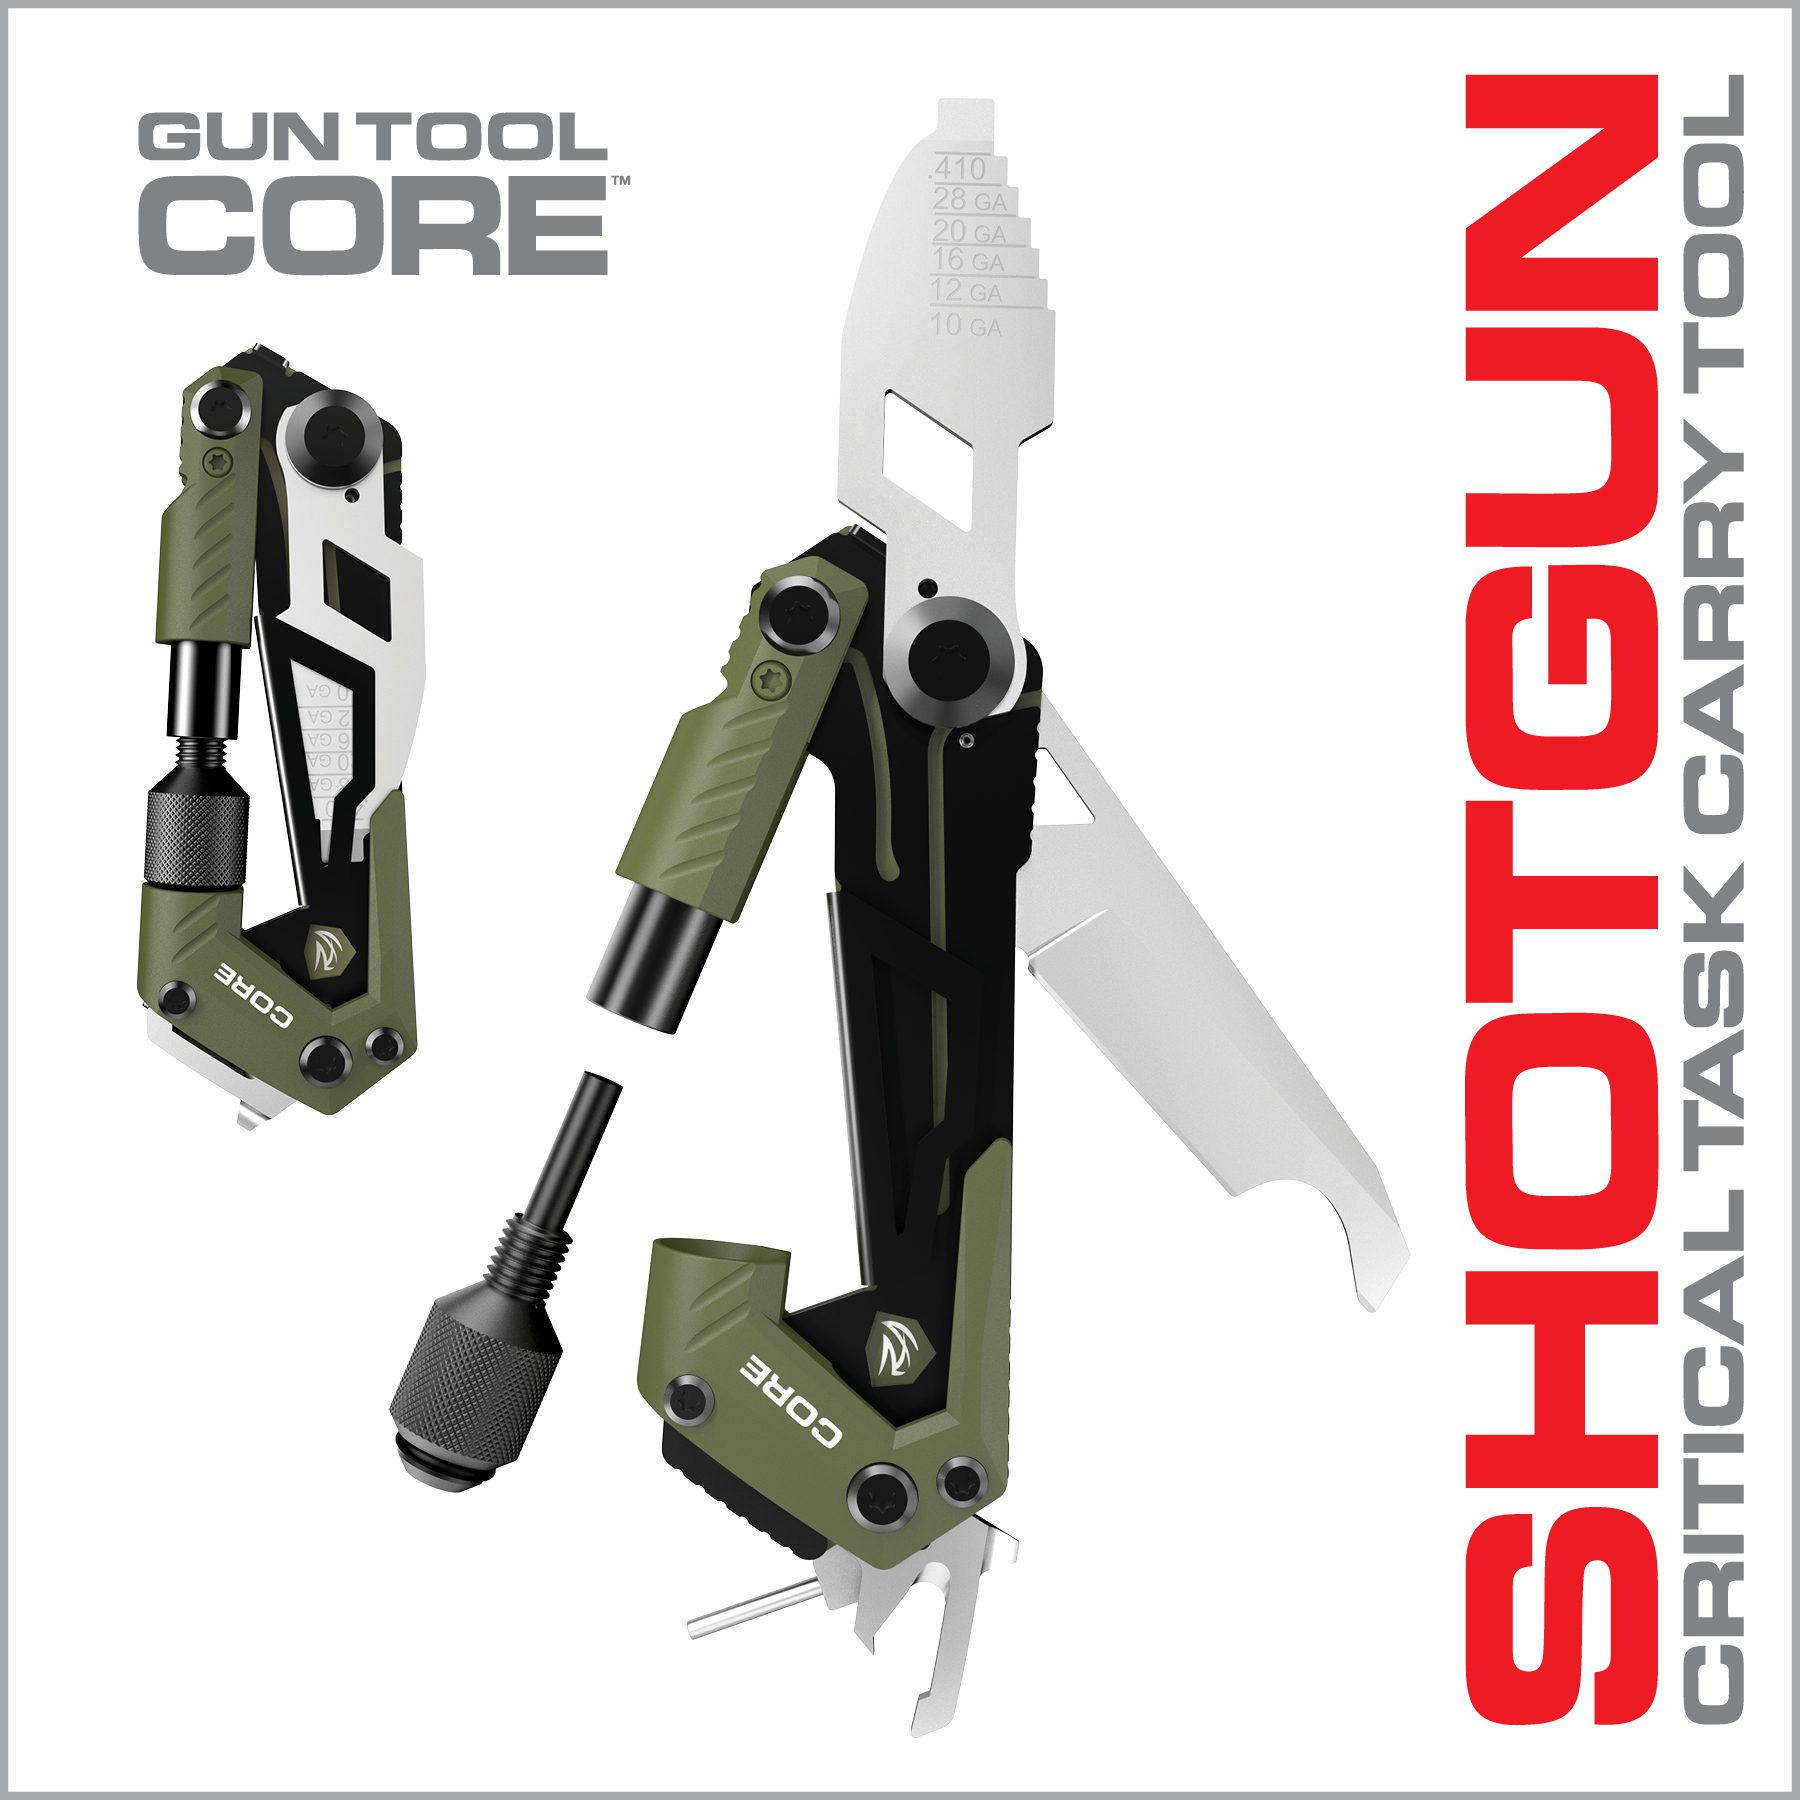 the gun tool is designed to look like it has been opened